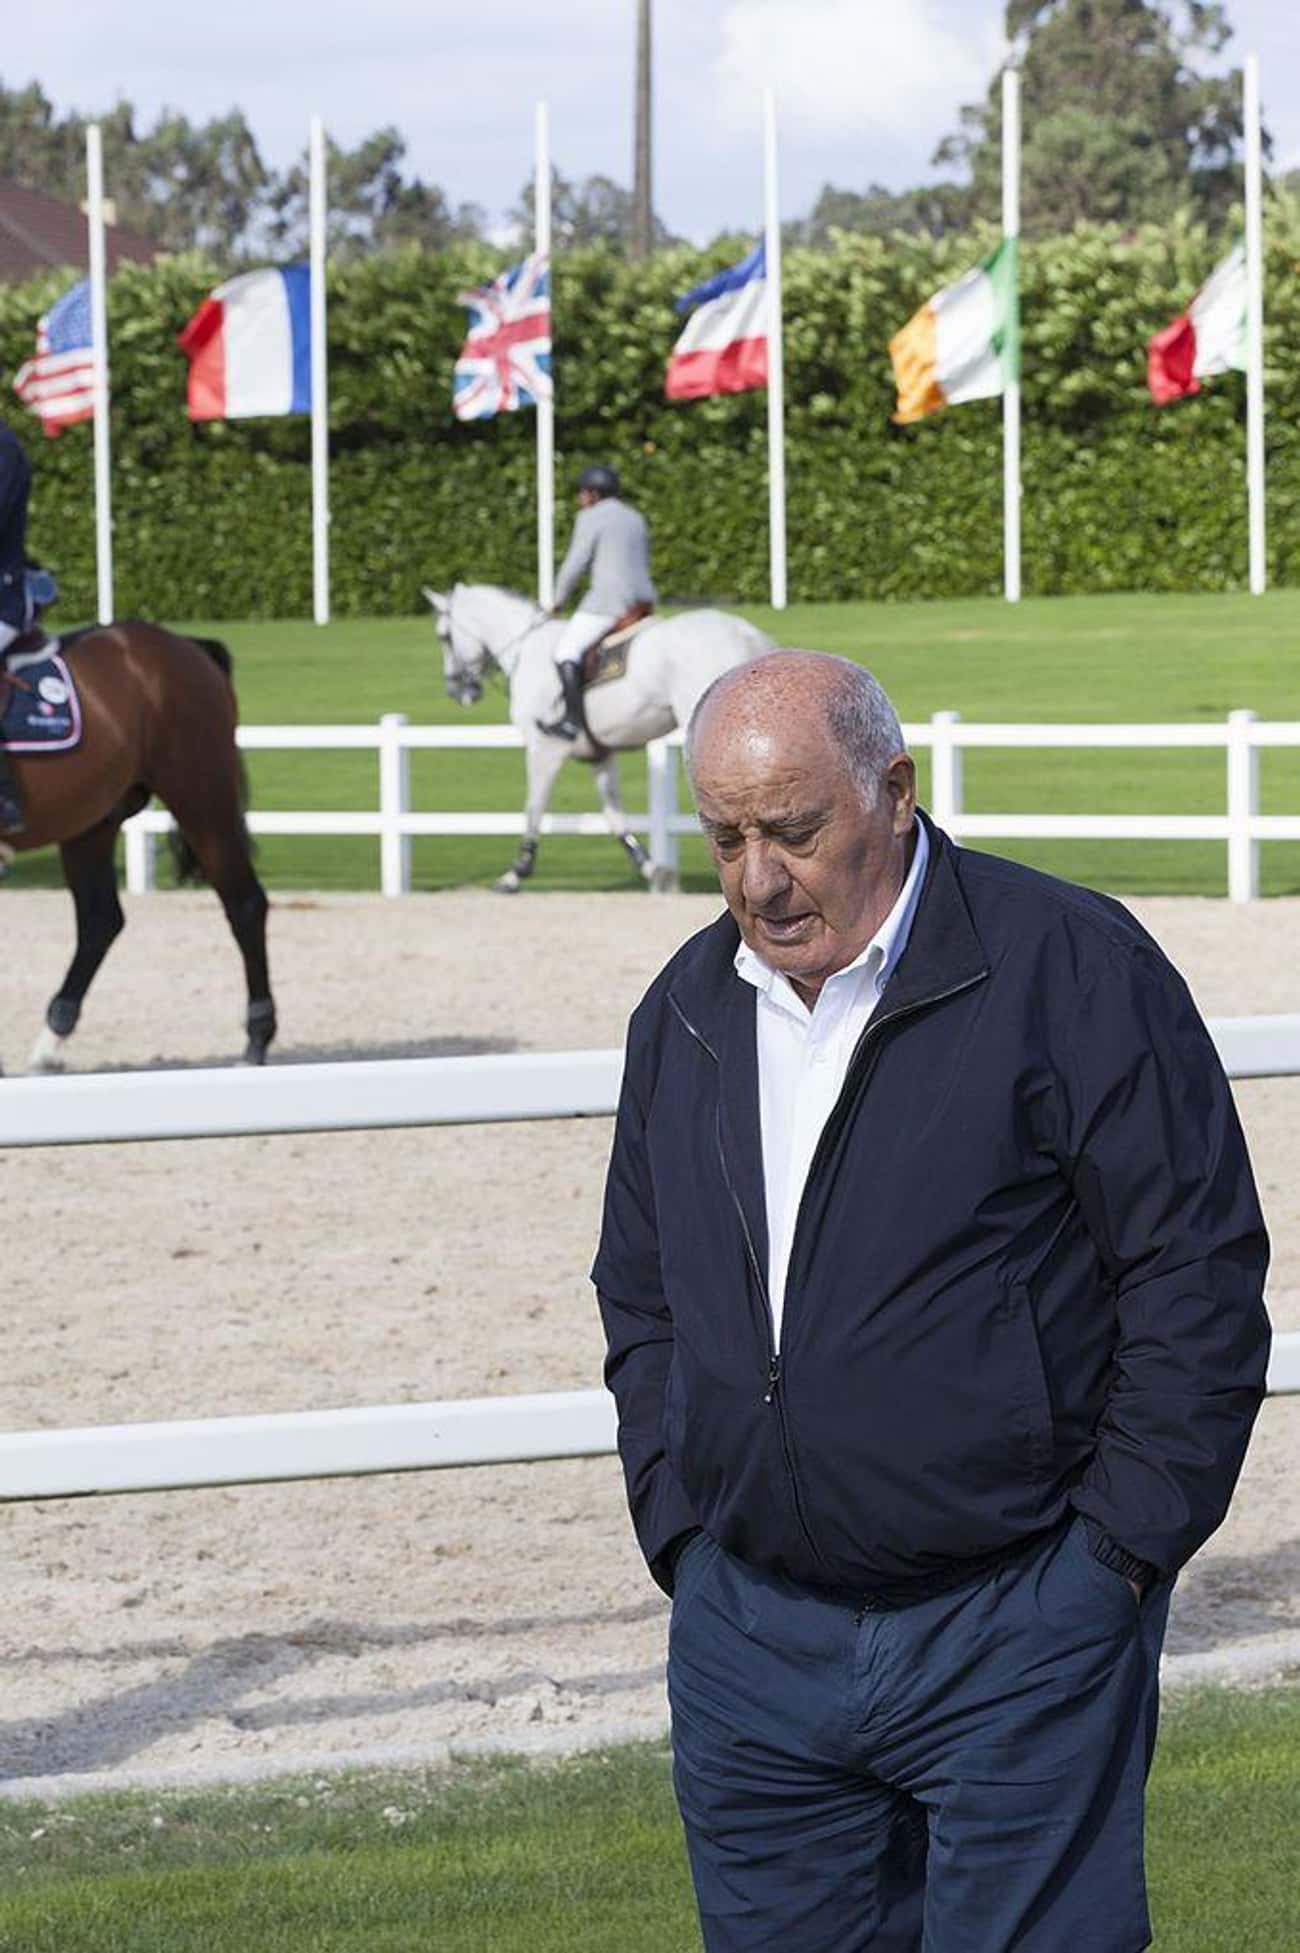 You Would Never Know Amancio Ortega Was A Billionaire Just By Looking At Him